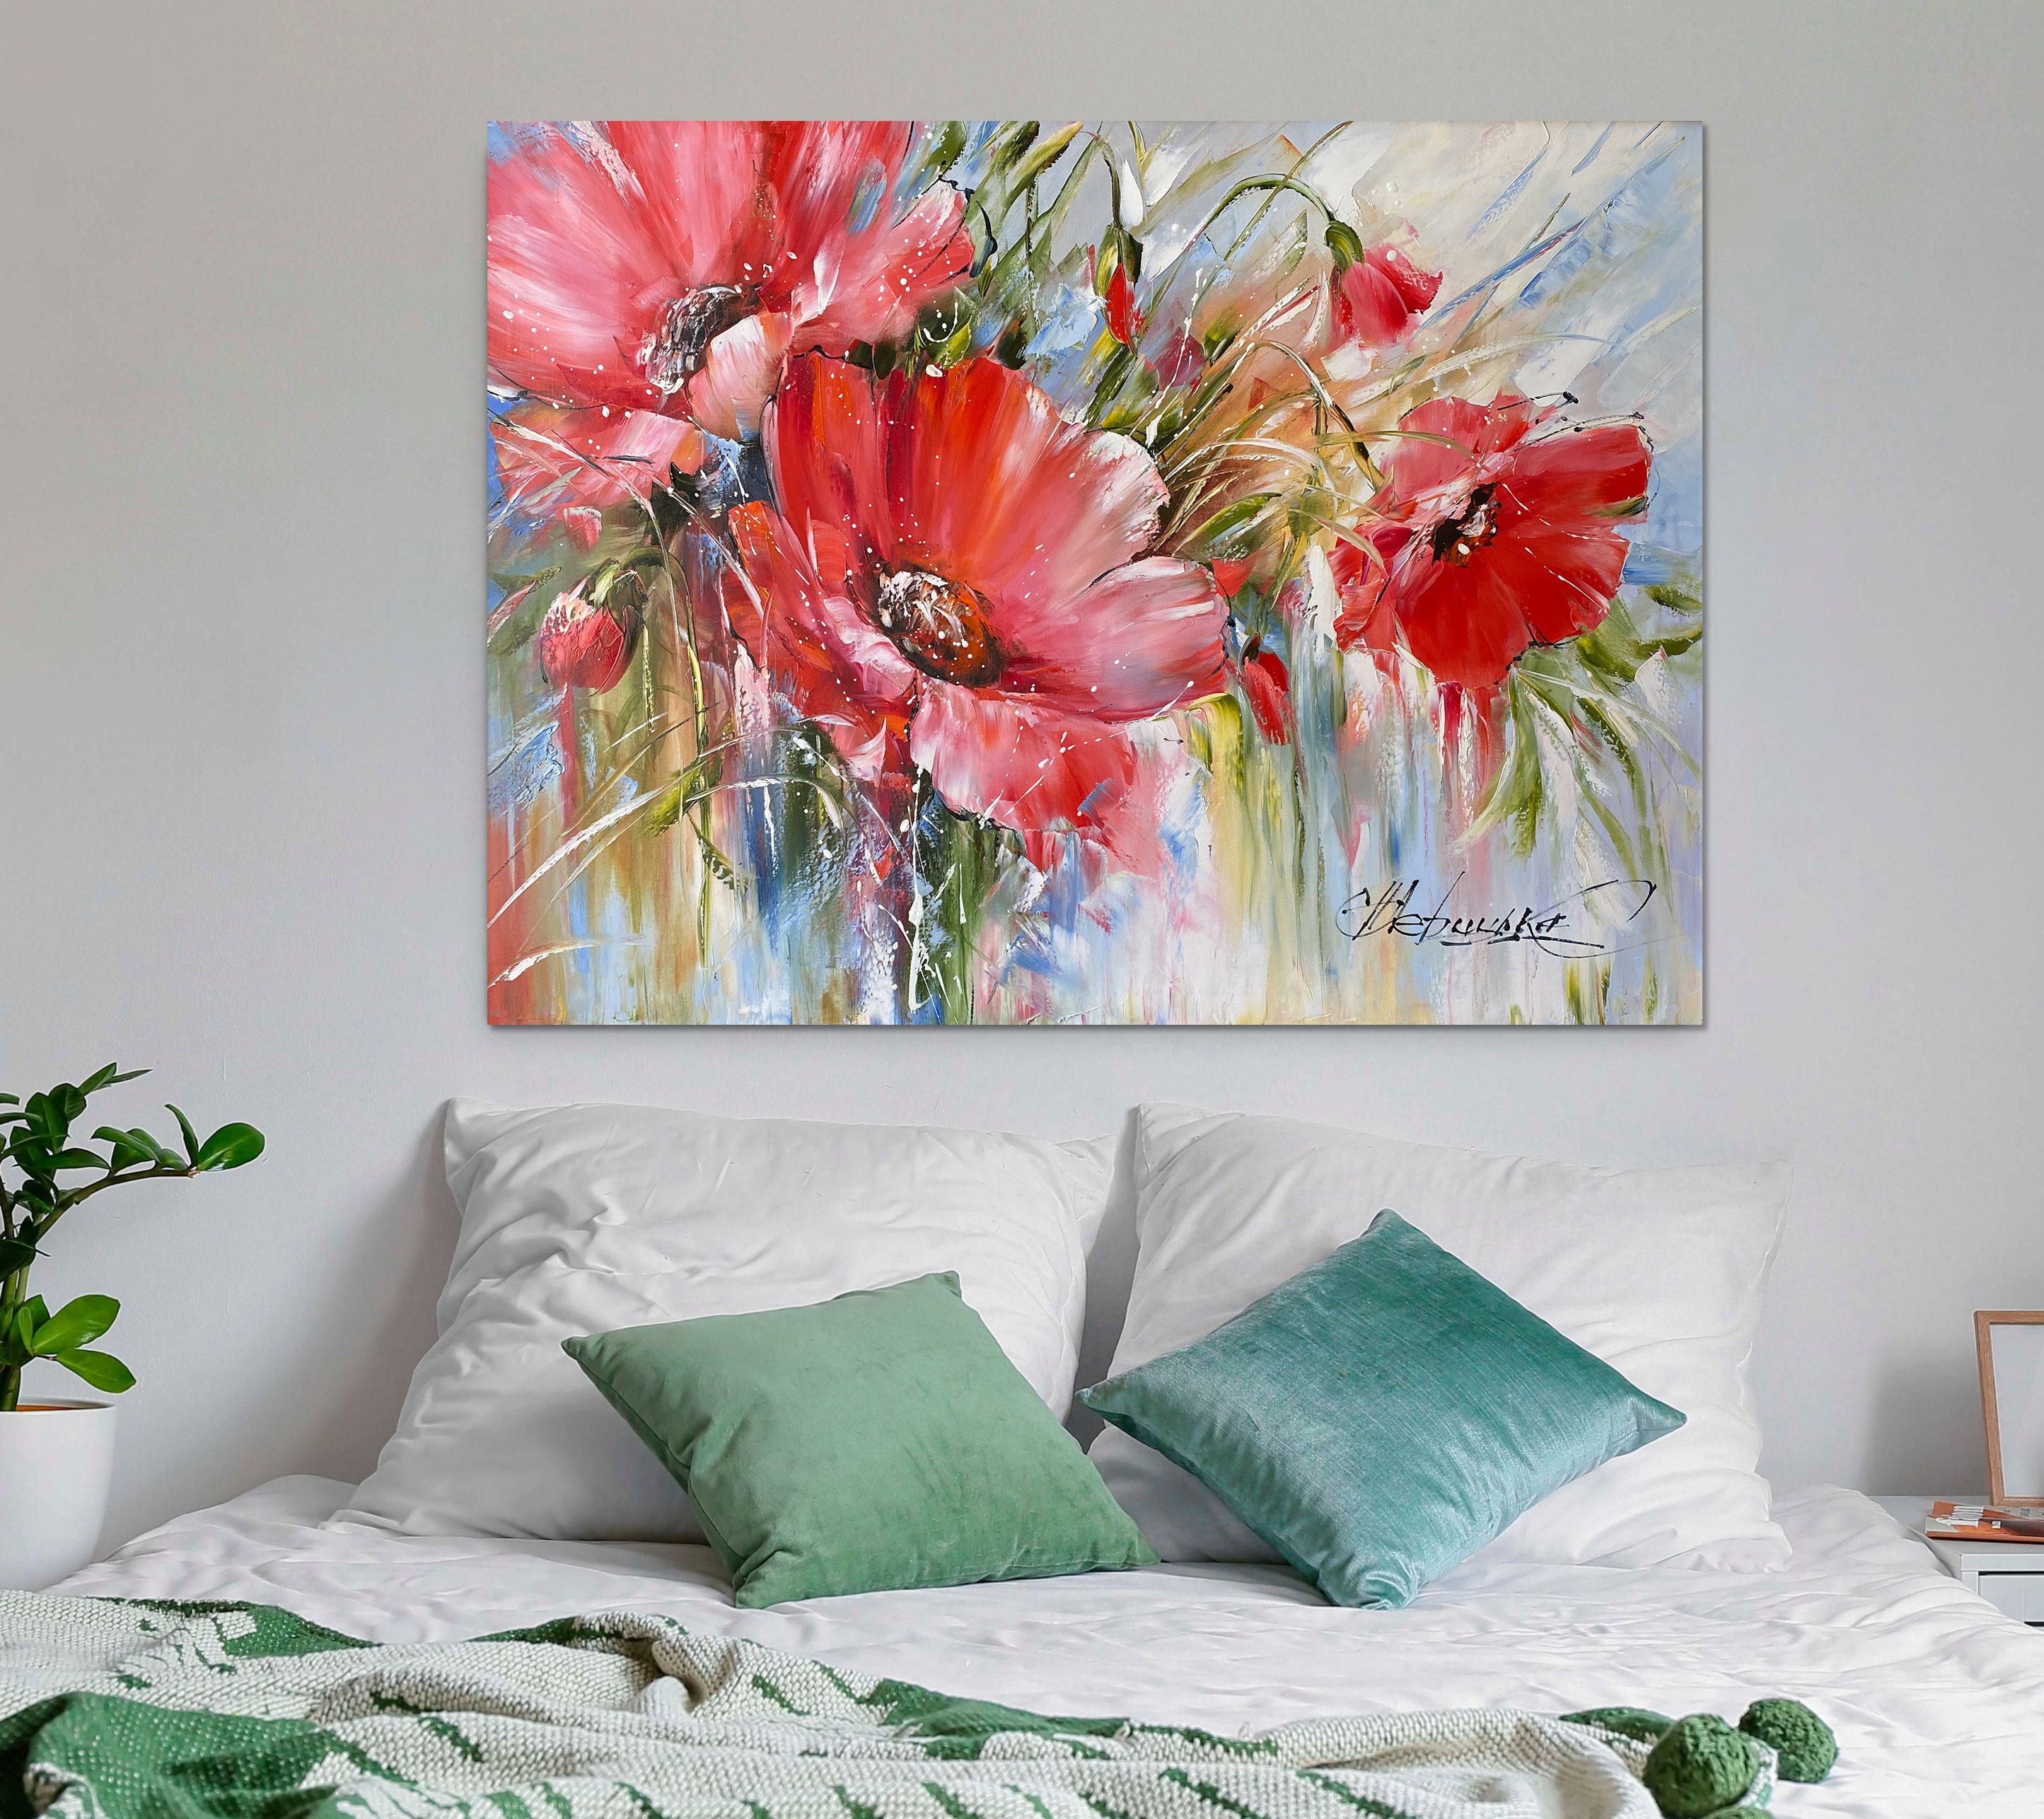 Framed Stretched Blooming Poppy Flowers Oil Painting, Set of 3, 40 x 27.5  - On Sale - Bed Bath & Beyond - 32385481